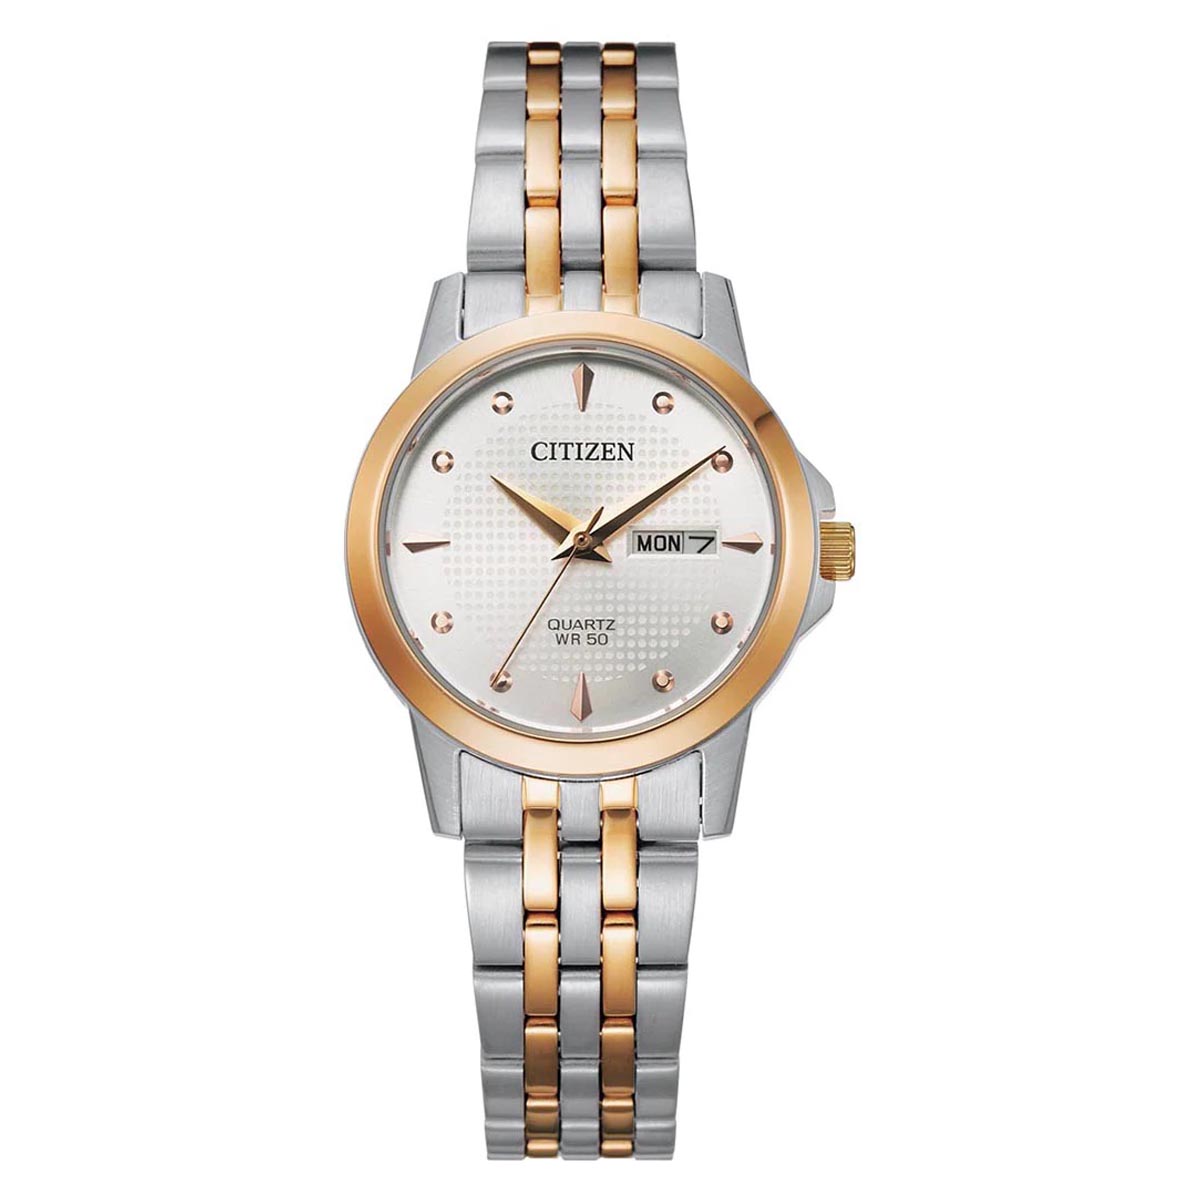 Citizen Ladies Watch with White Dial and Stainless Steel and Rose Gold Toned Bracelet (quartz movement)